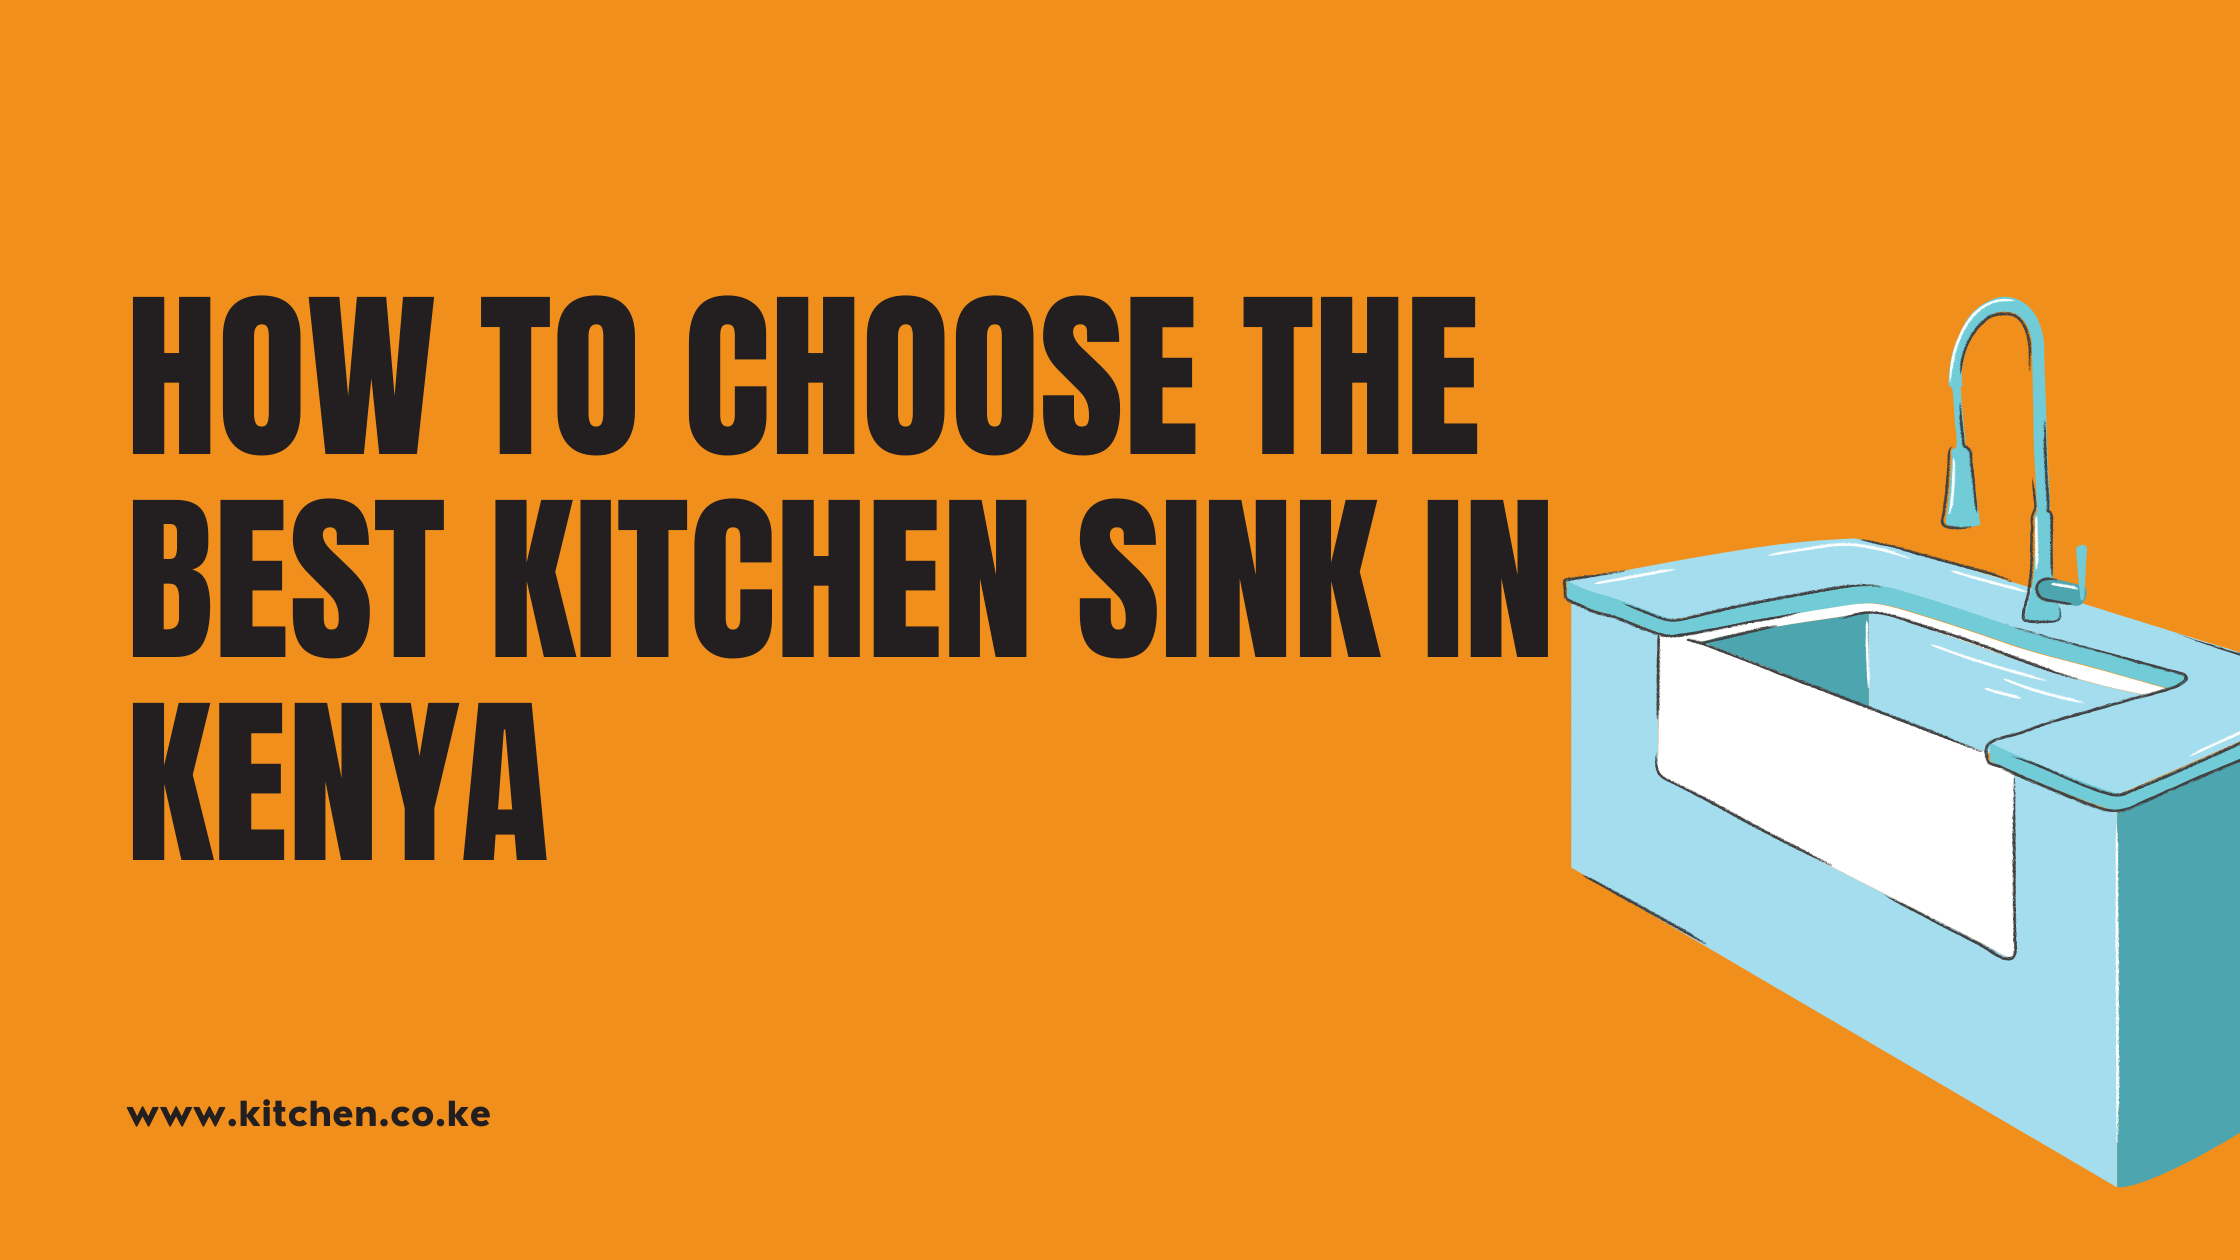 How To Choose The Best Kitchen Sink in Kenya